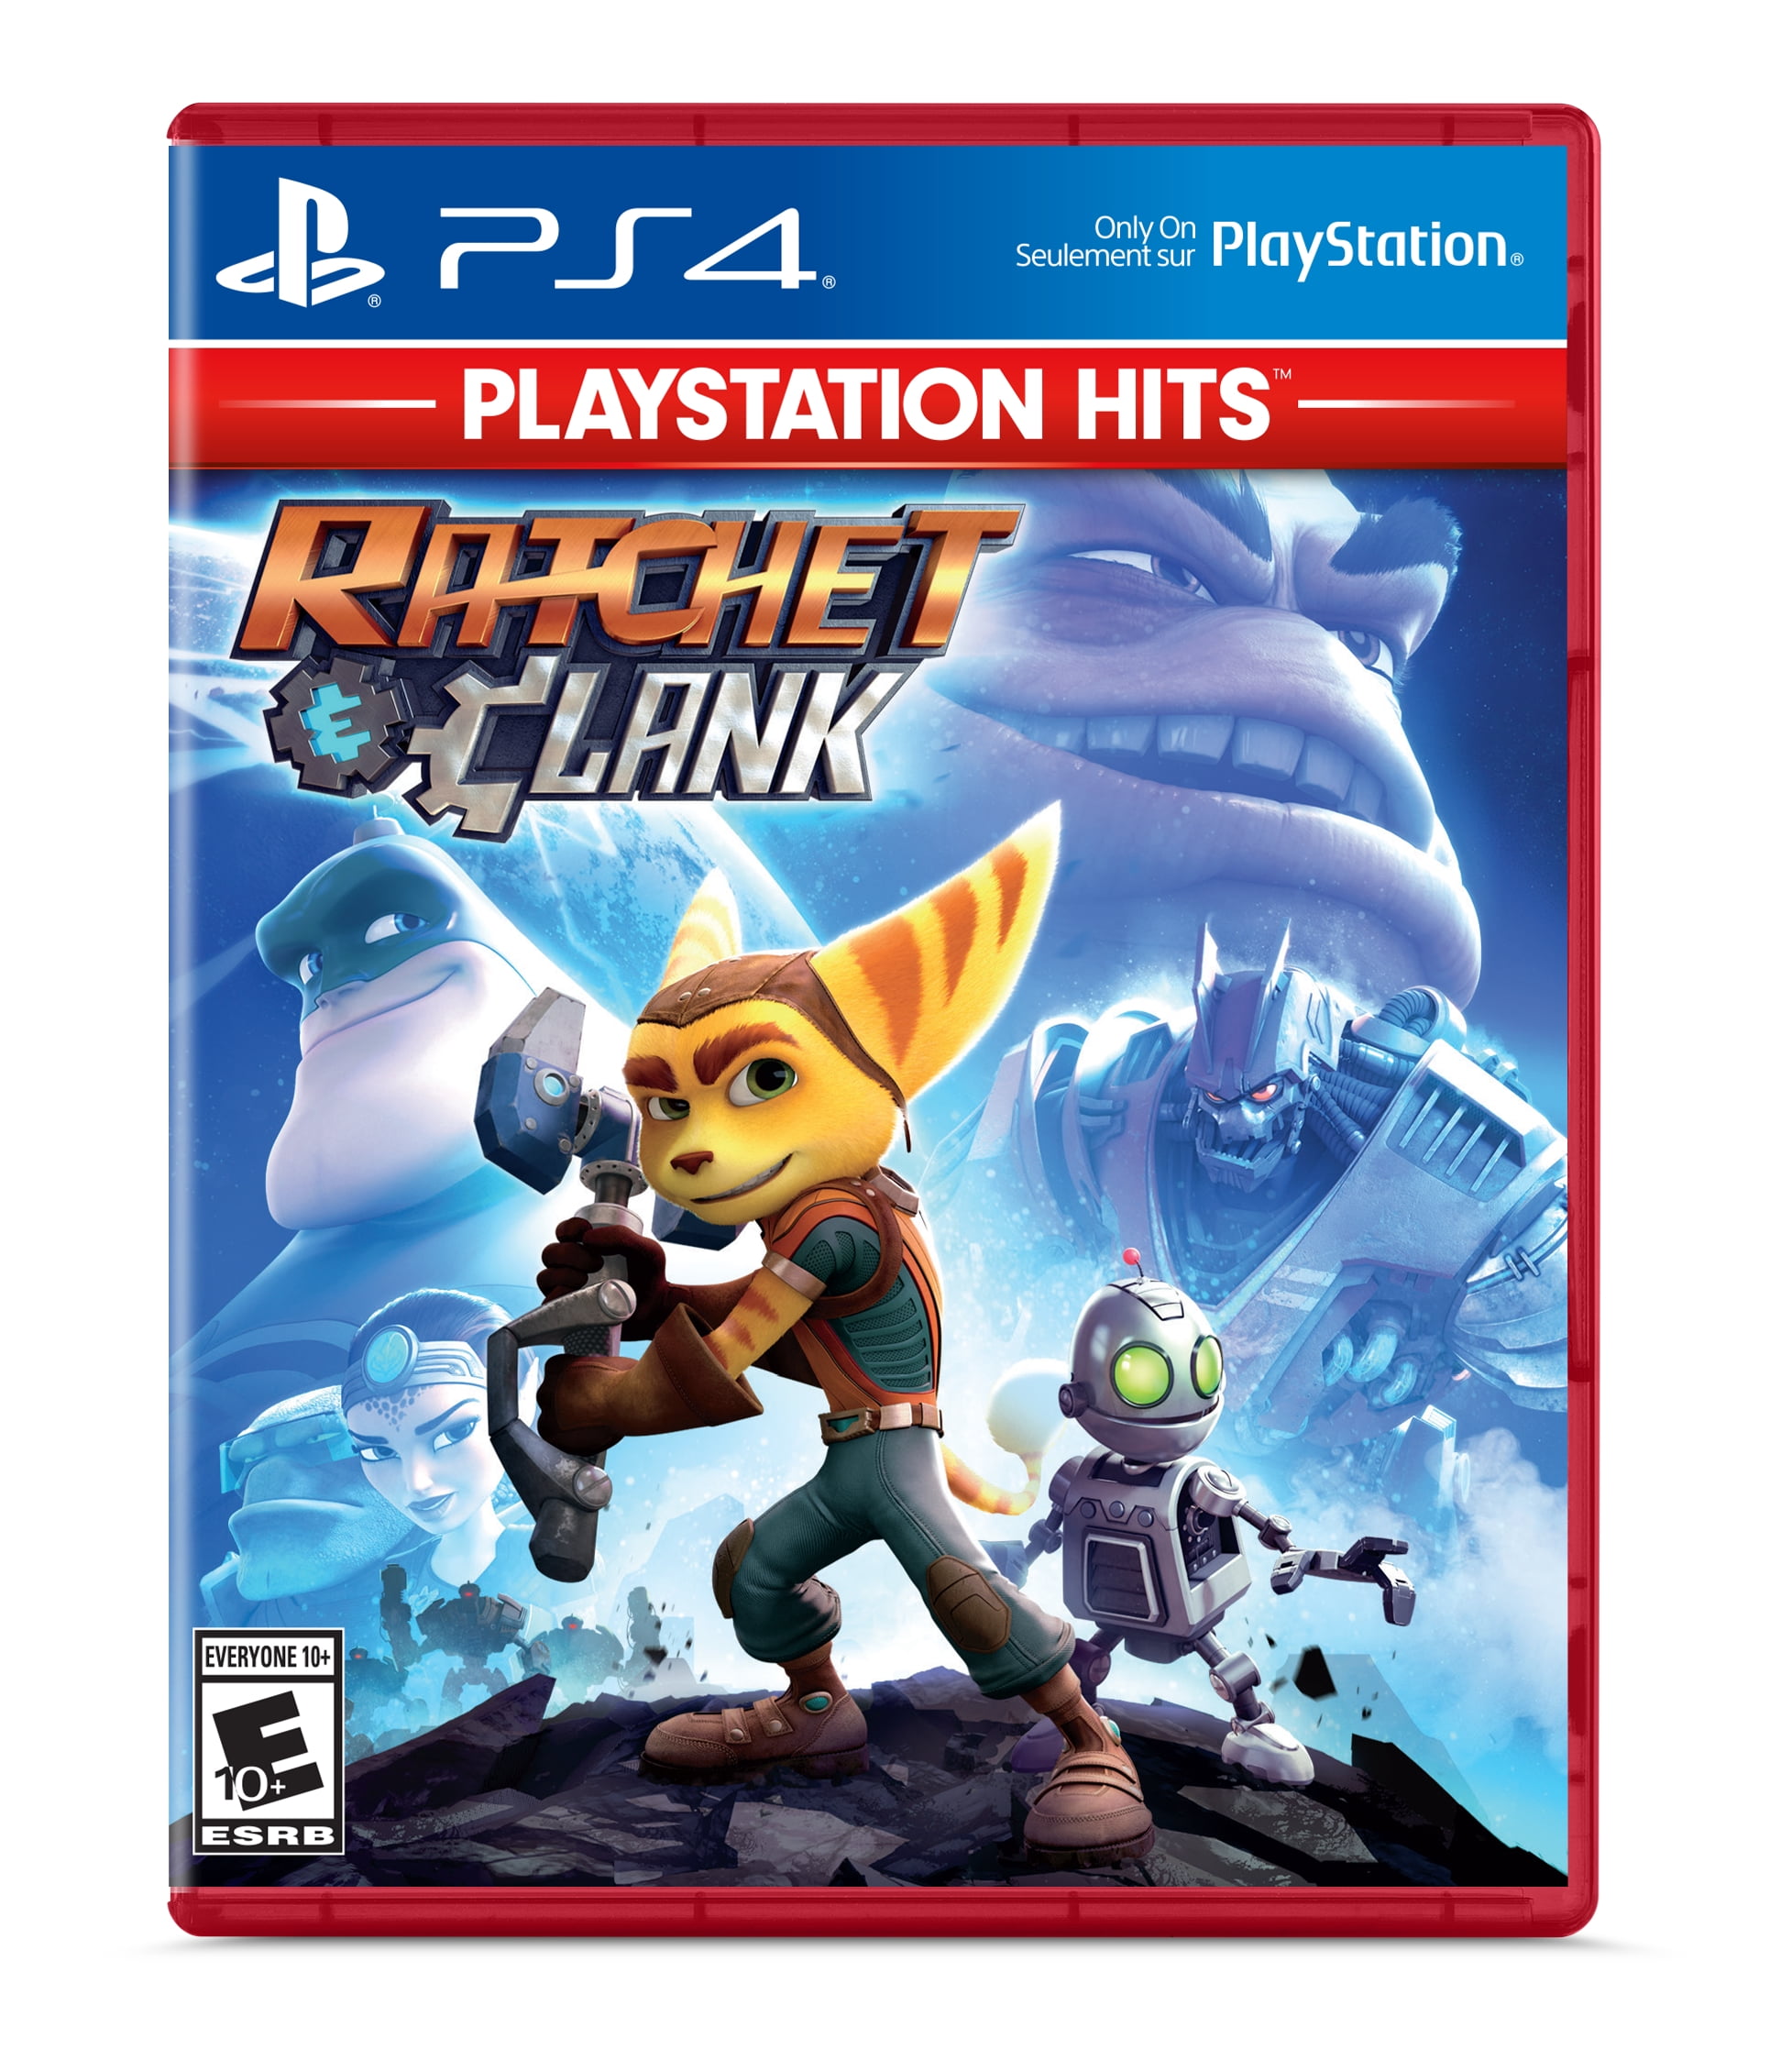 Ratchet & Clank, PS2 - PS3 - PS4 - PS5